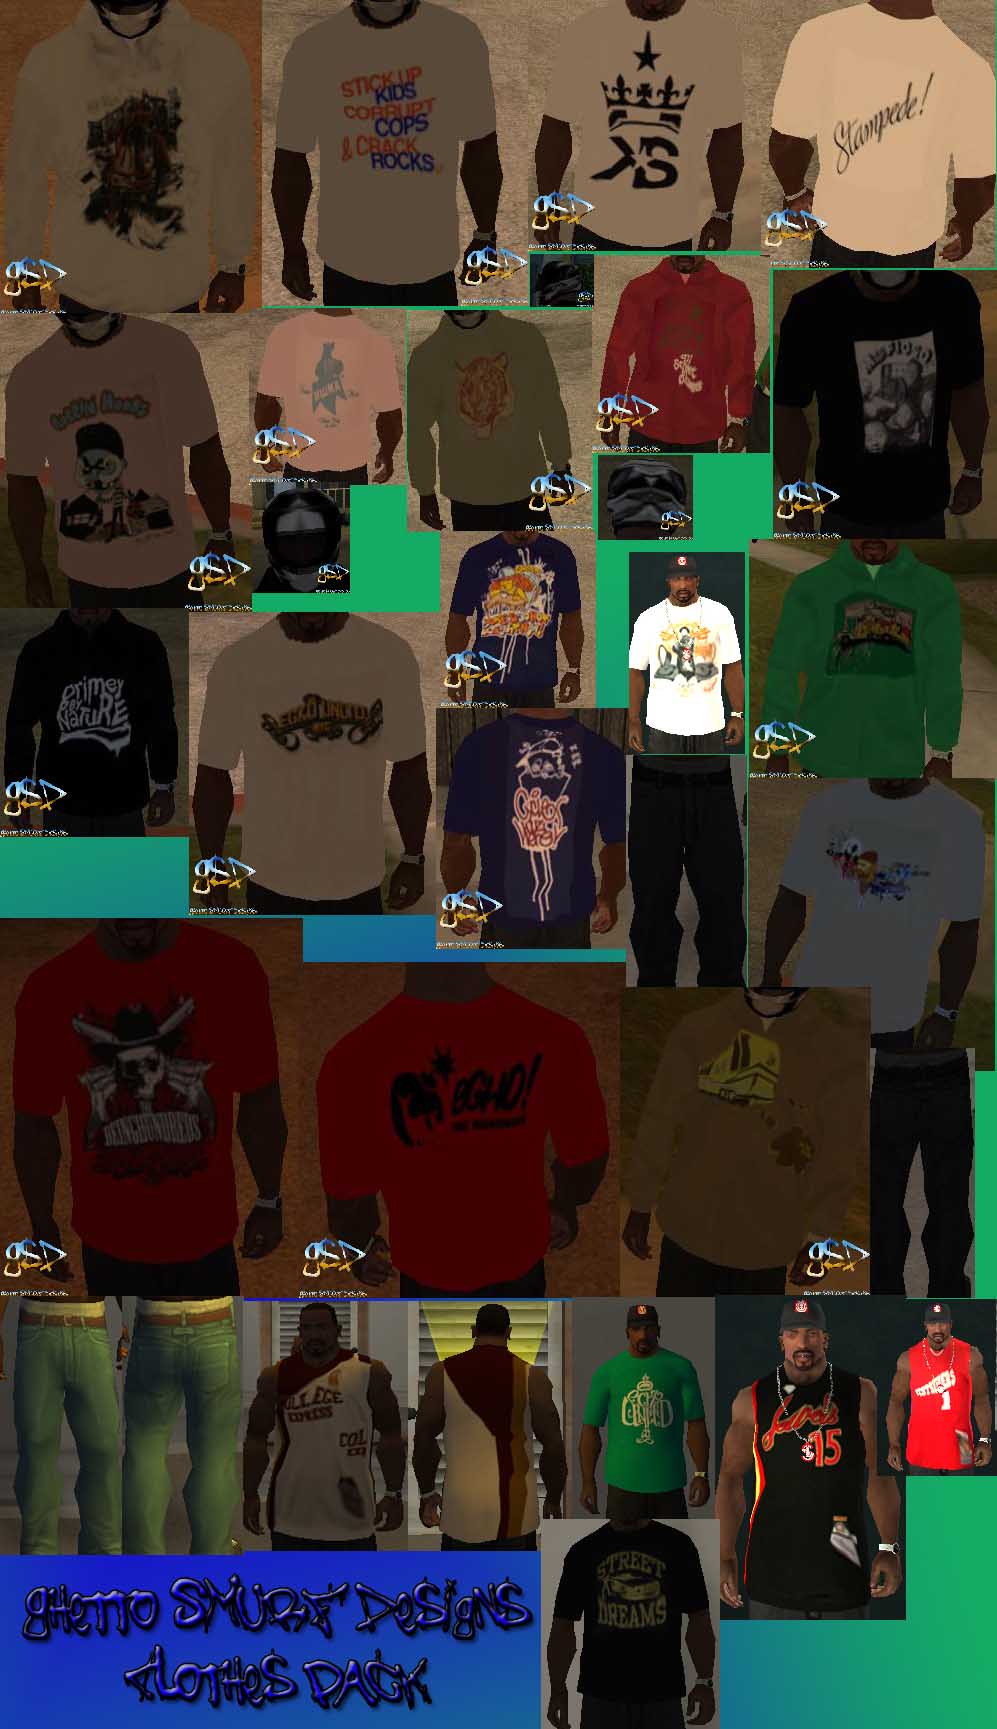 The GTA Place - Complete Clothing Pack